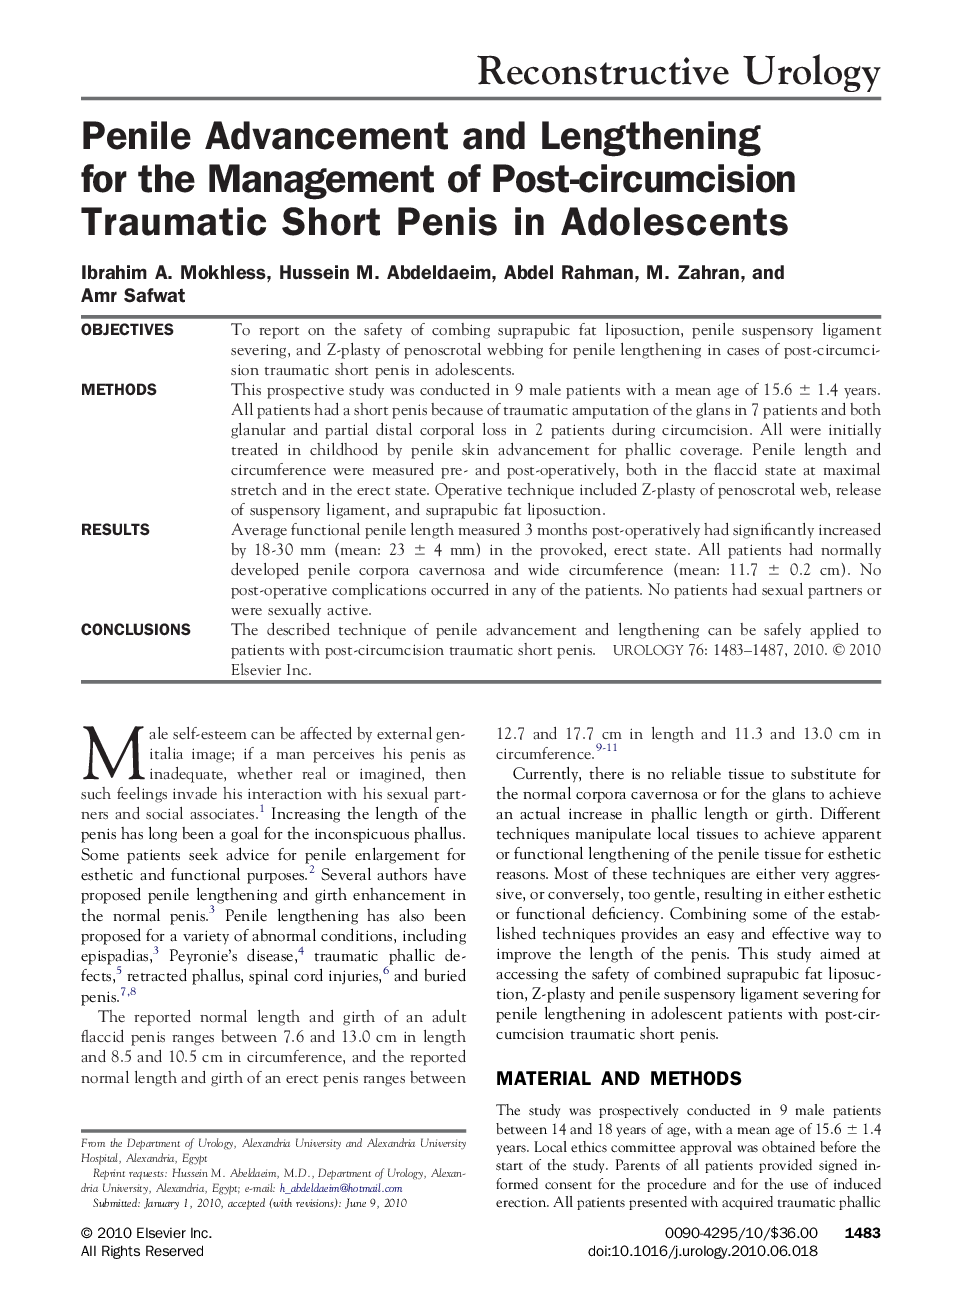 Penile Advancement and Lengthening for the Management of Post-circumcision Traumatic Short Penis in Adolescents